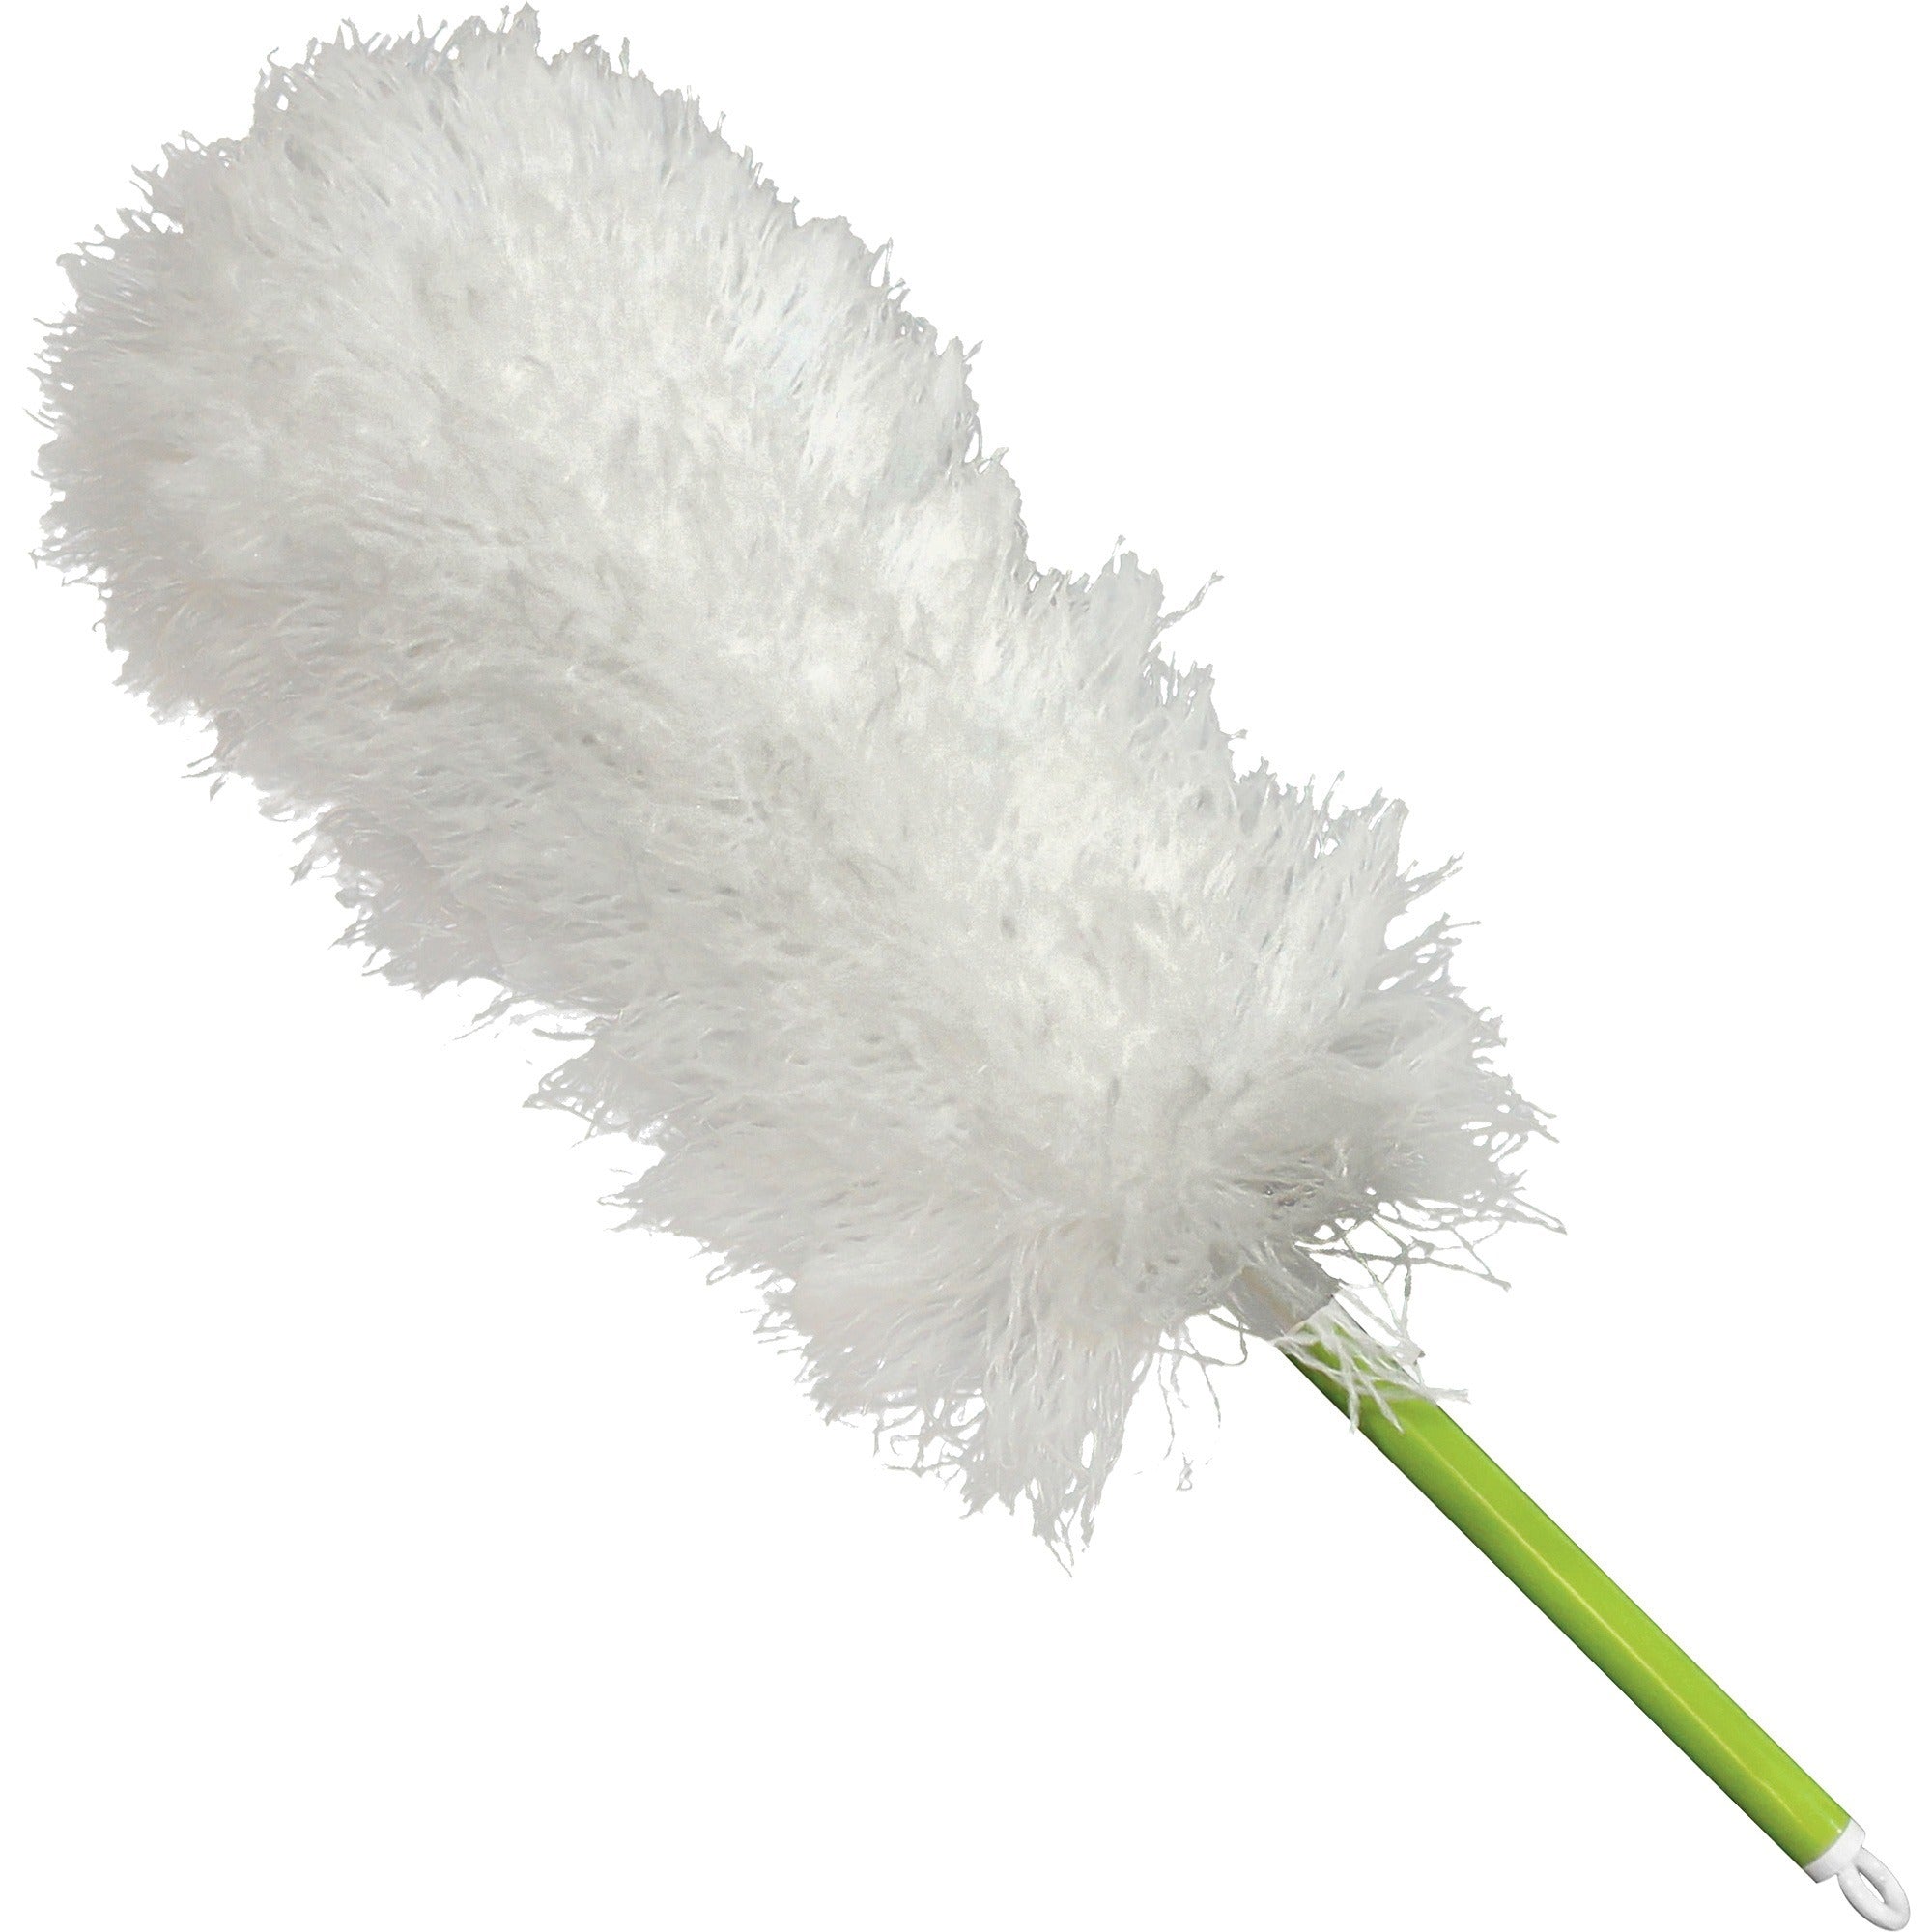 Impact Microfiber Hand Duster - 16" Overall Length - 1 Each - Green, White - 